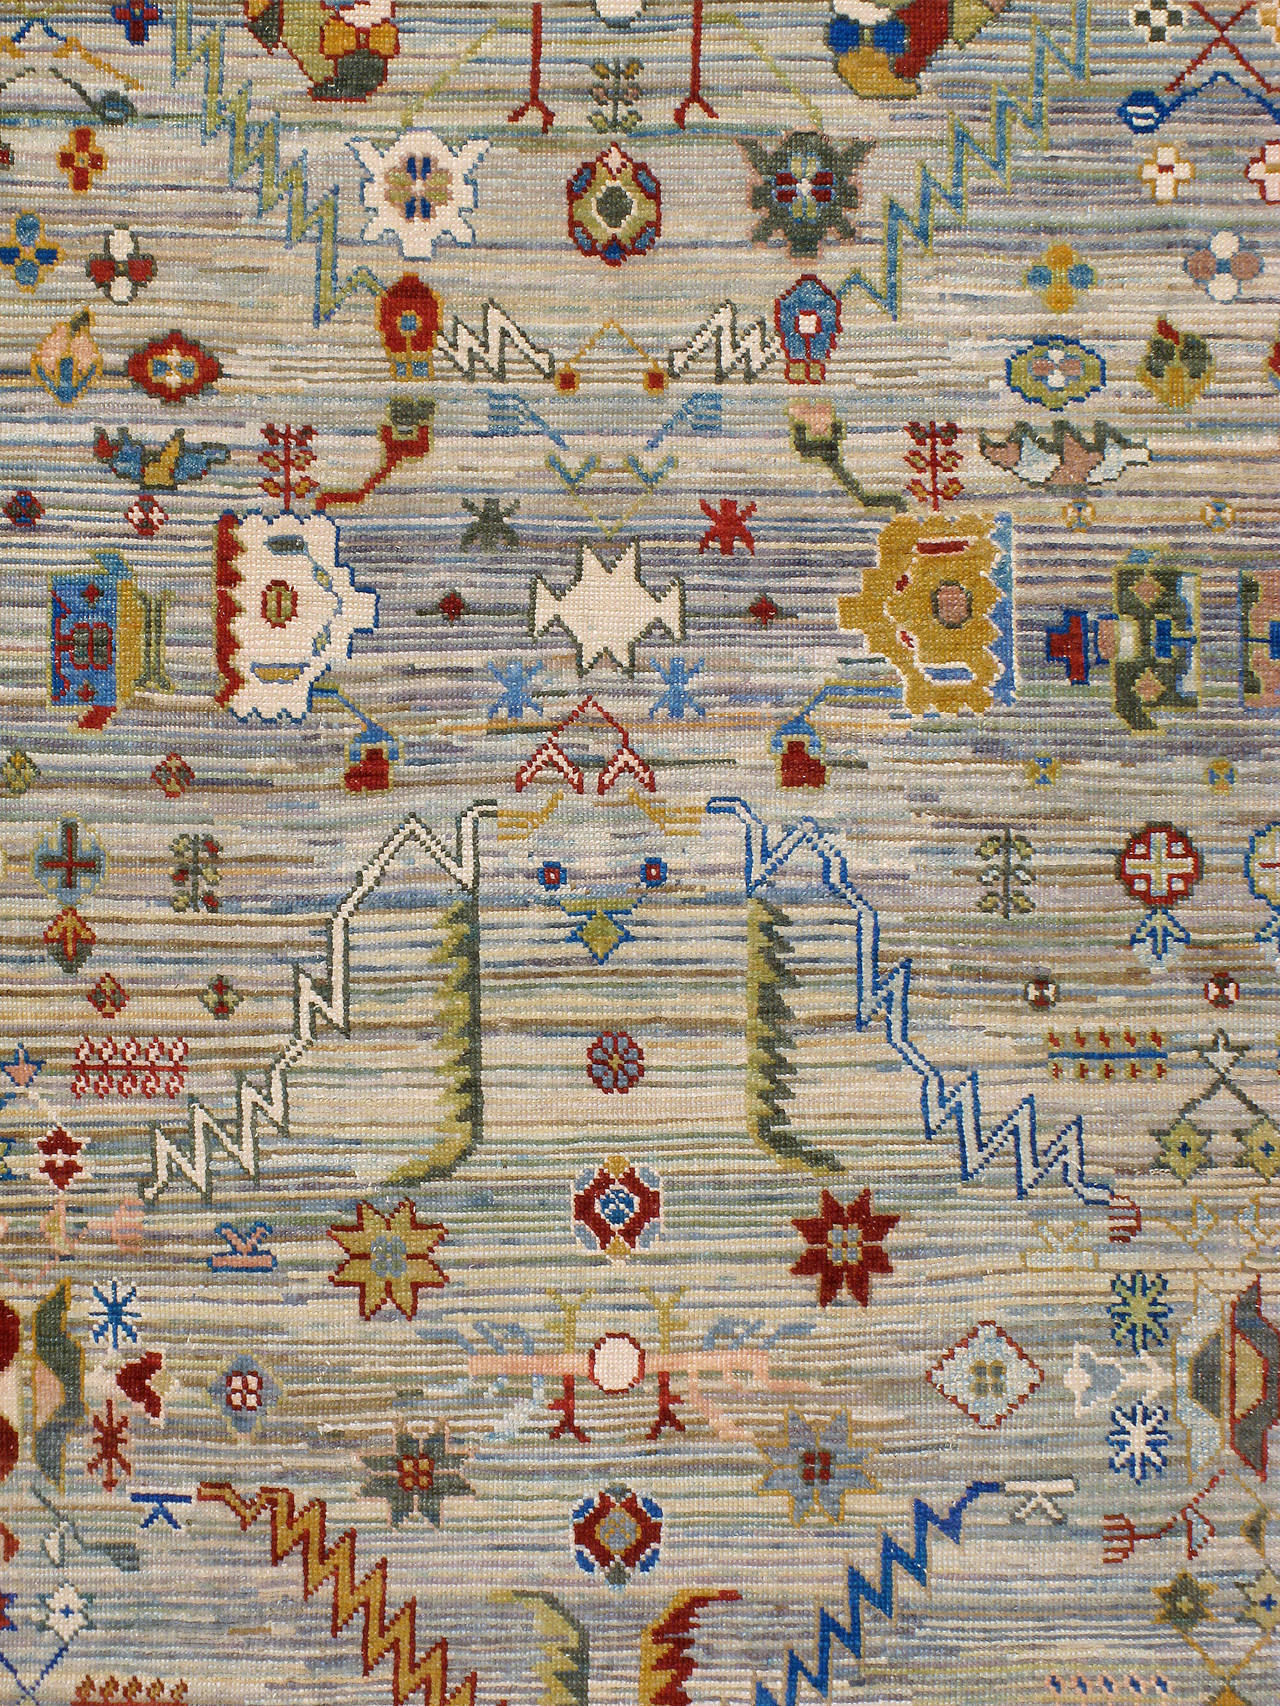 A contemporary Turkish Oushak Style carpet from the fourth quarter of the 20th century. The rug is woven with repurposed old wool to create a vintage look and feel.